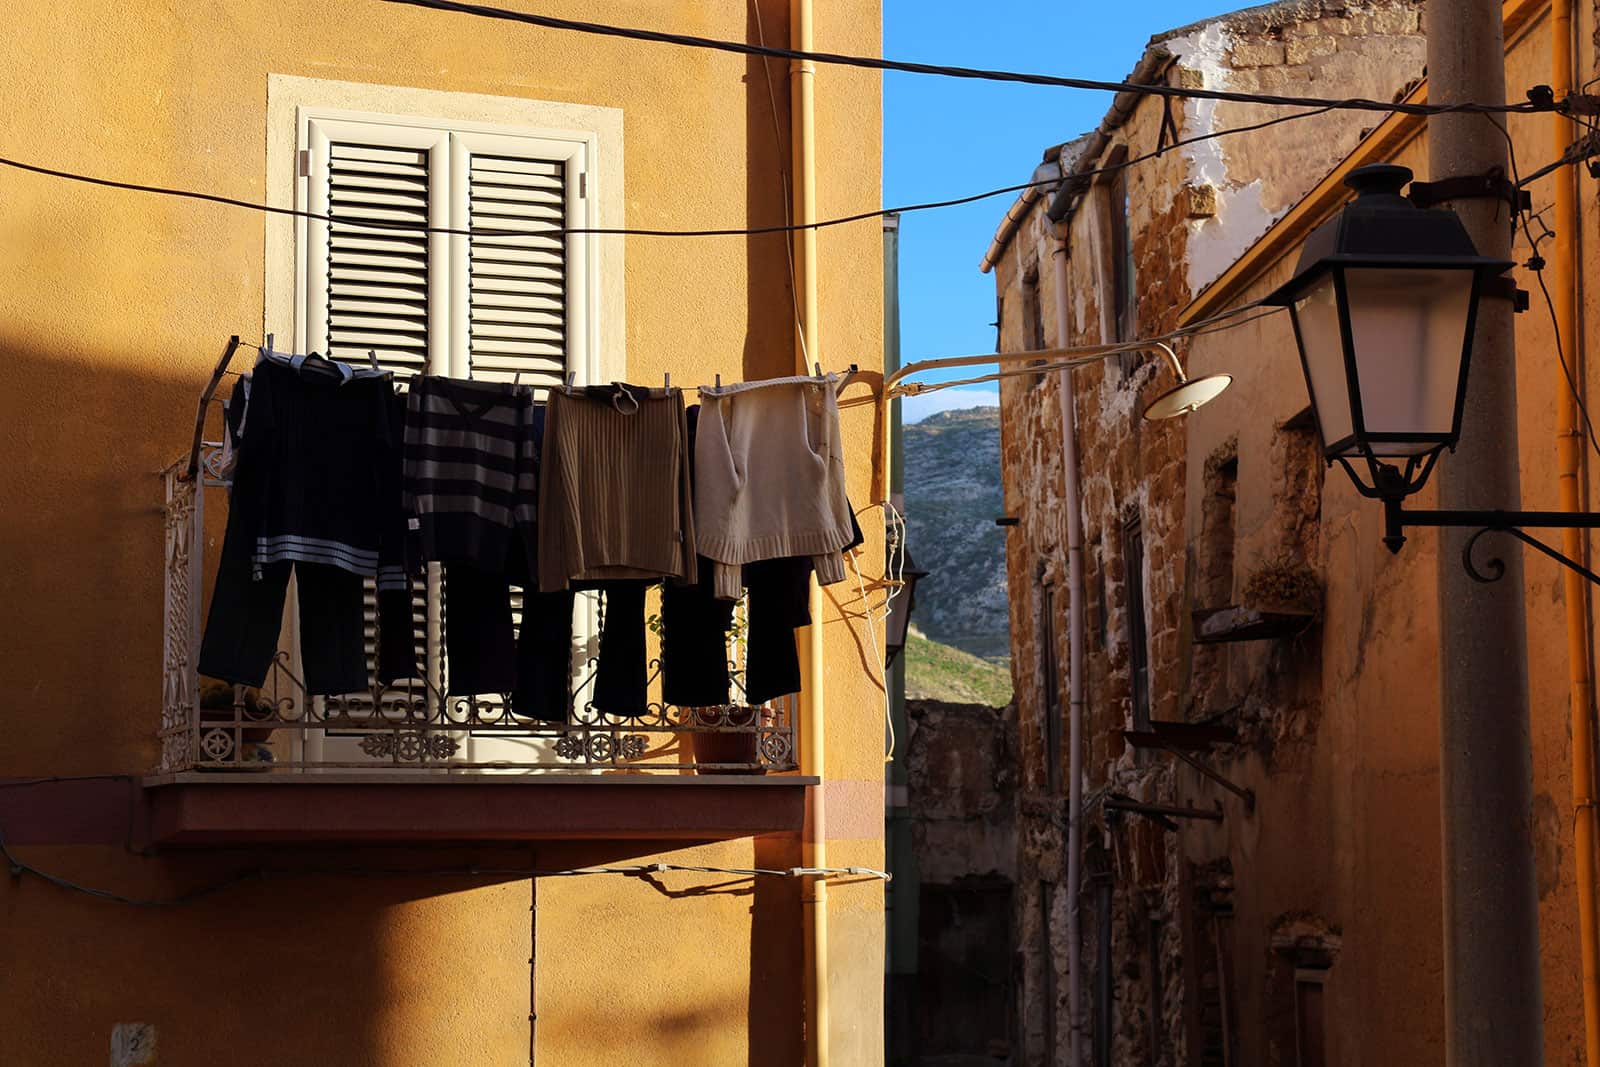 Clothes drying over the narrow street in Siculiana.